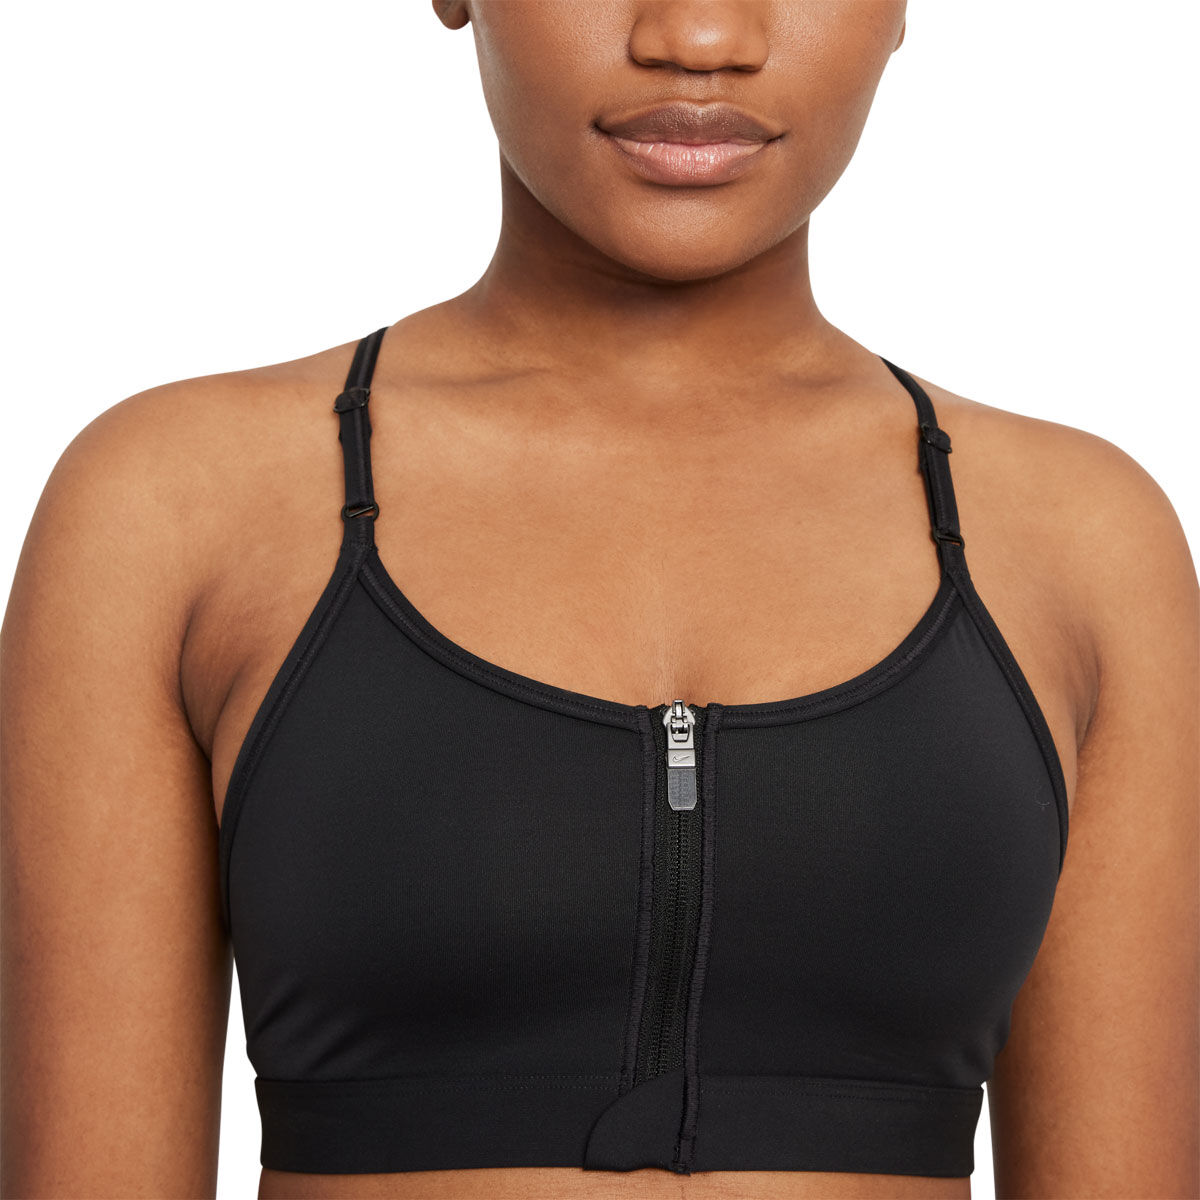 Nike Dri Fit Indy Zip Front Light Support Padded Sports Sports Bra